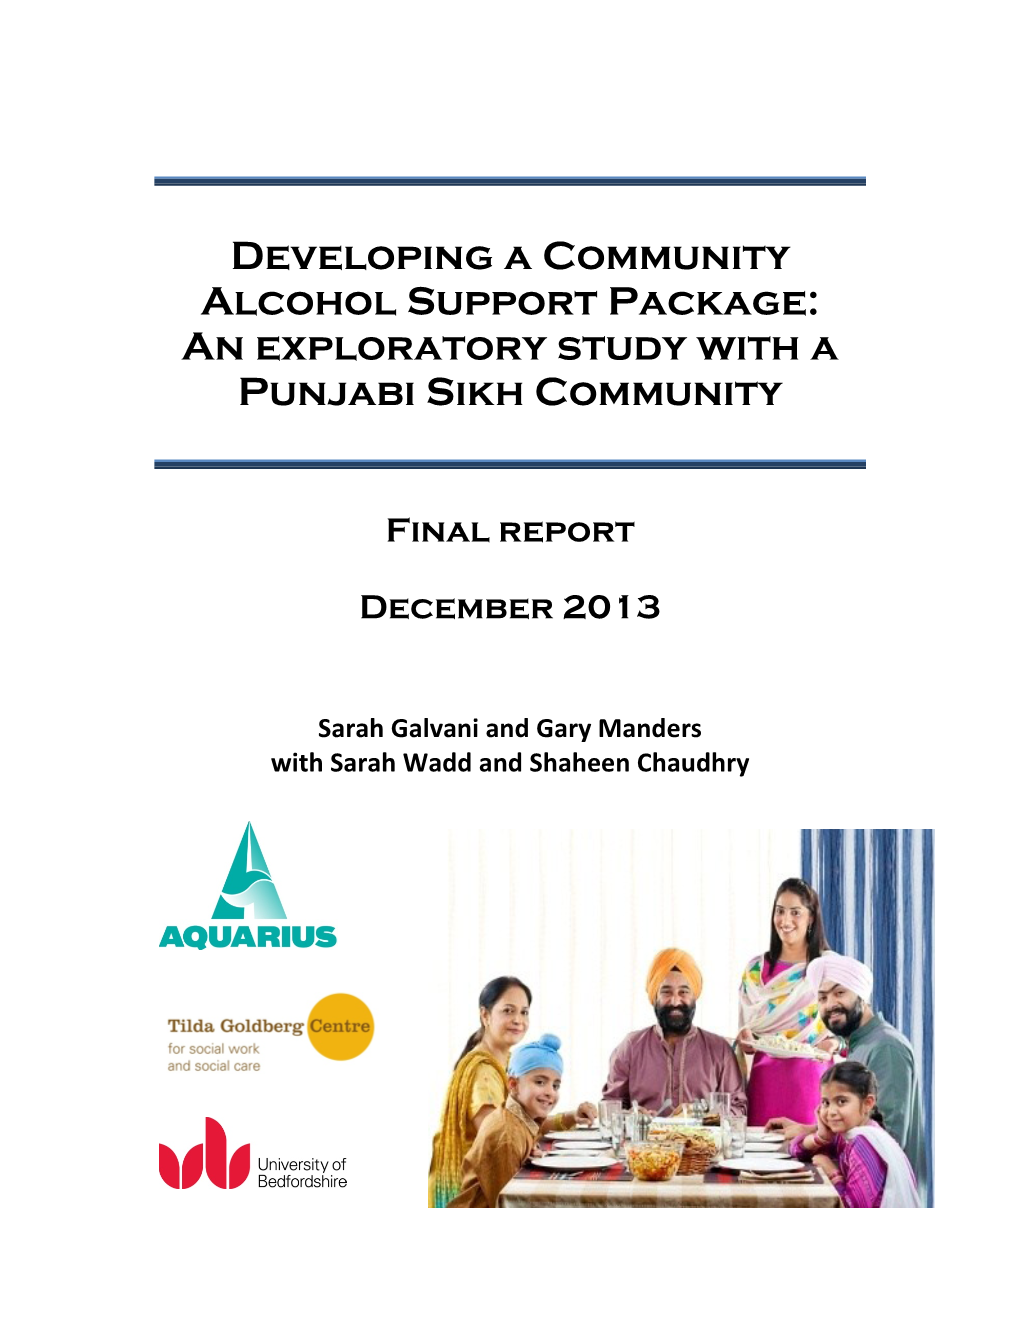 Developing a Community Alcohol Support Package: an Exploratory Study with a Punjabi Sikh Community